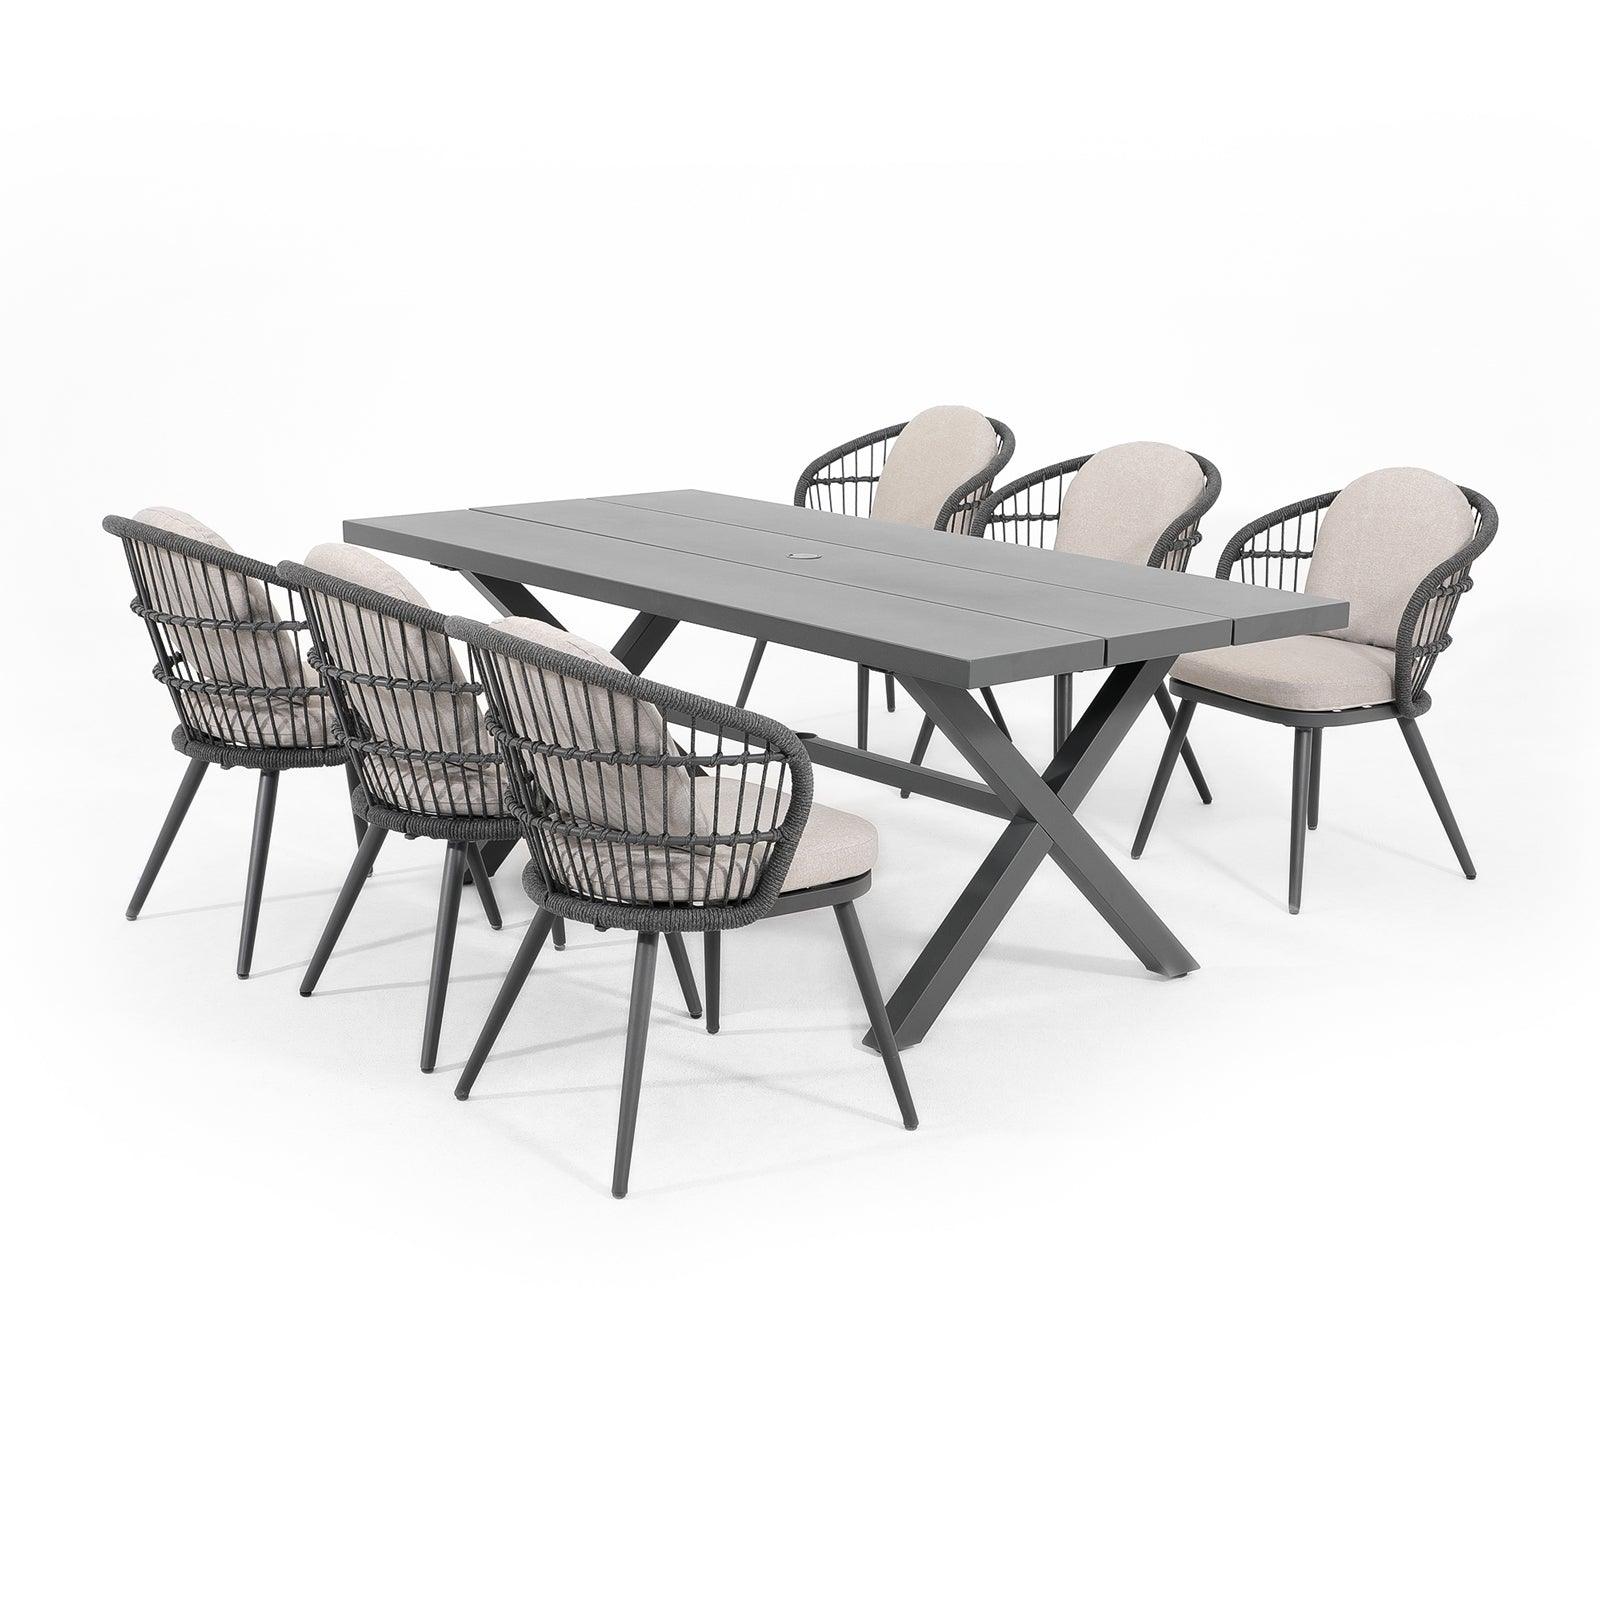 Comino dark grey aluminum outdoor Dining Set for 6 with light grey cushions, 6 dining chairs with backrest rope design, 1 rectangle aluminum dining table with x-shaped legs - Jardina Furniture